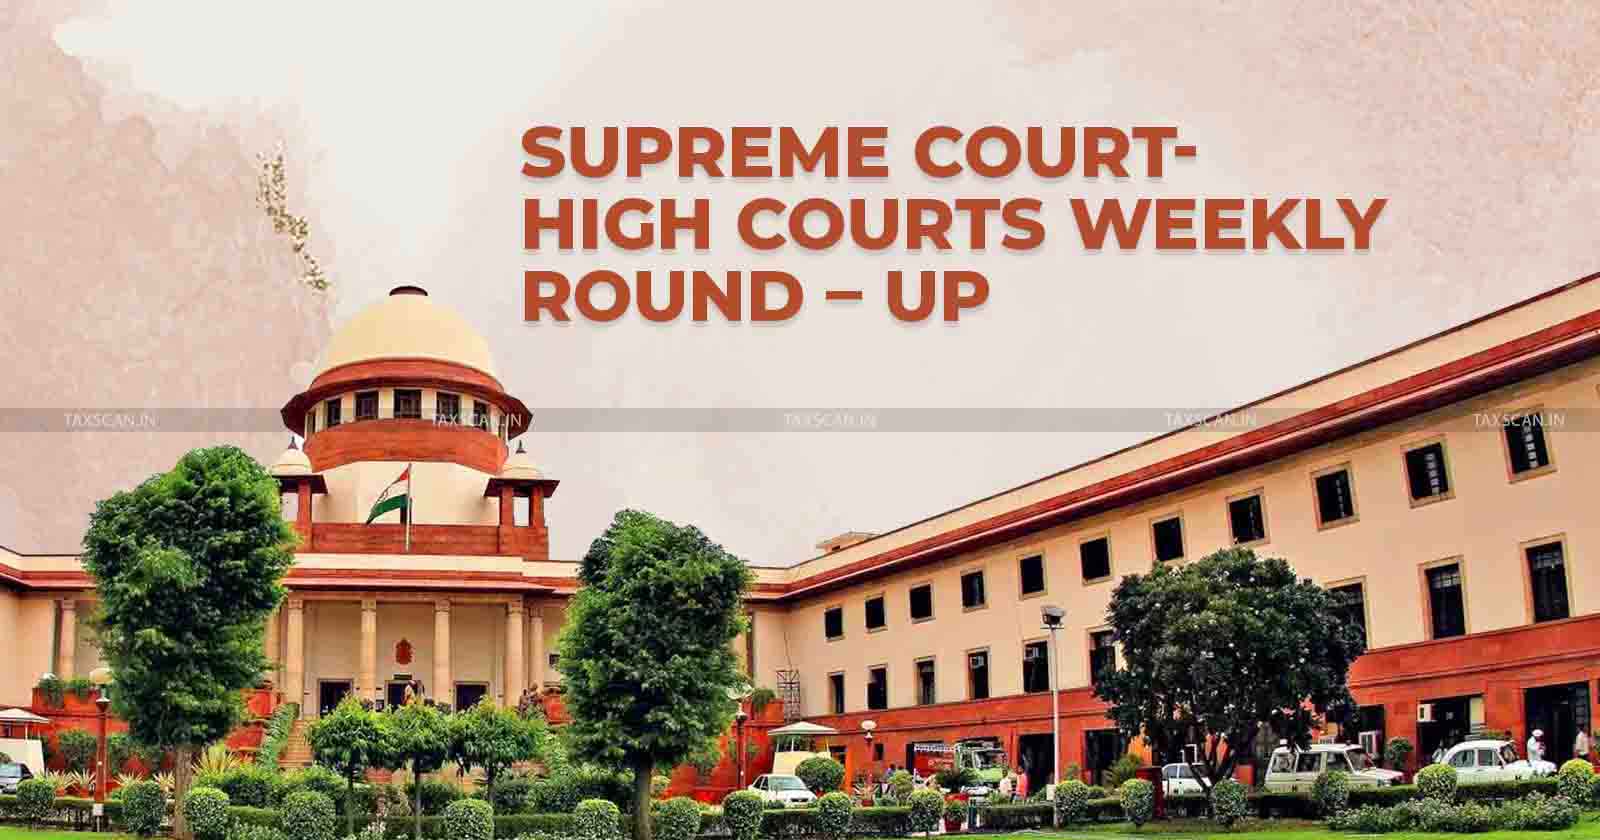 Supreme Court and High Court Weekly Round-Up - Supreme Court - High Court - Weekly Round-Up - Taxscan